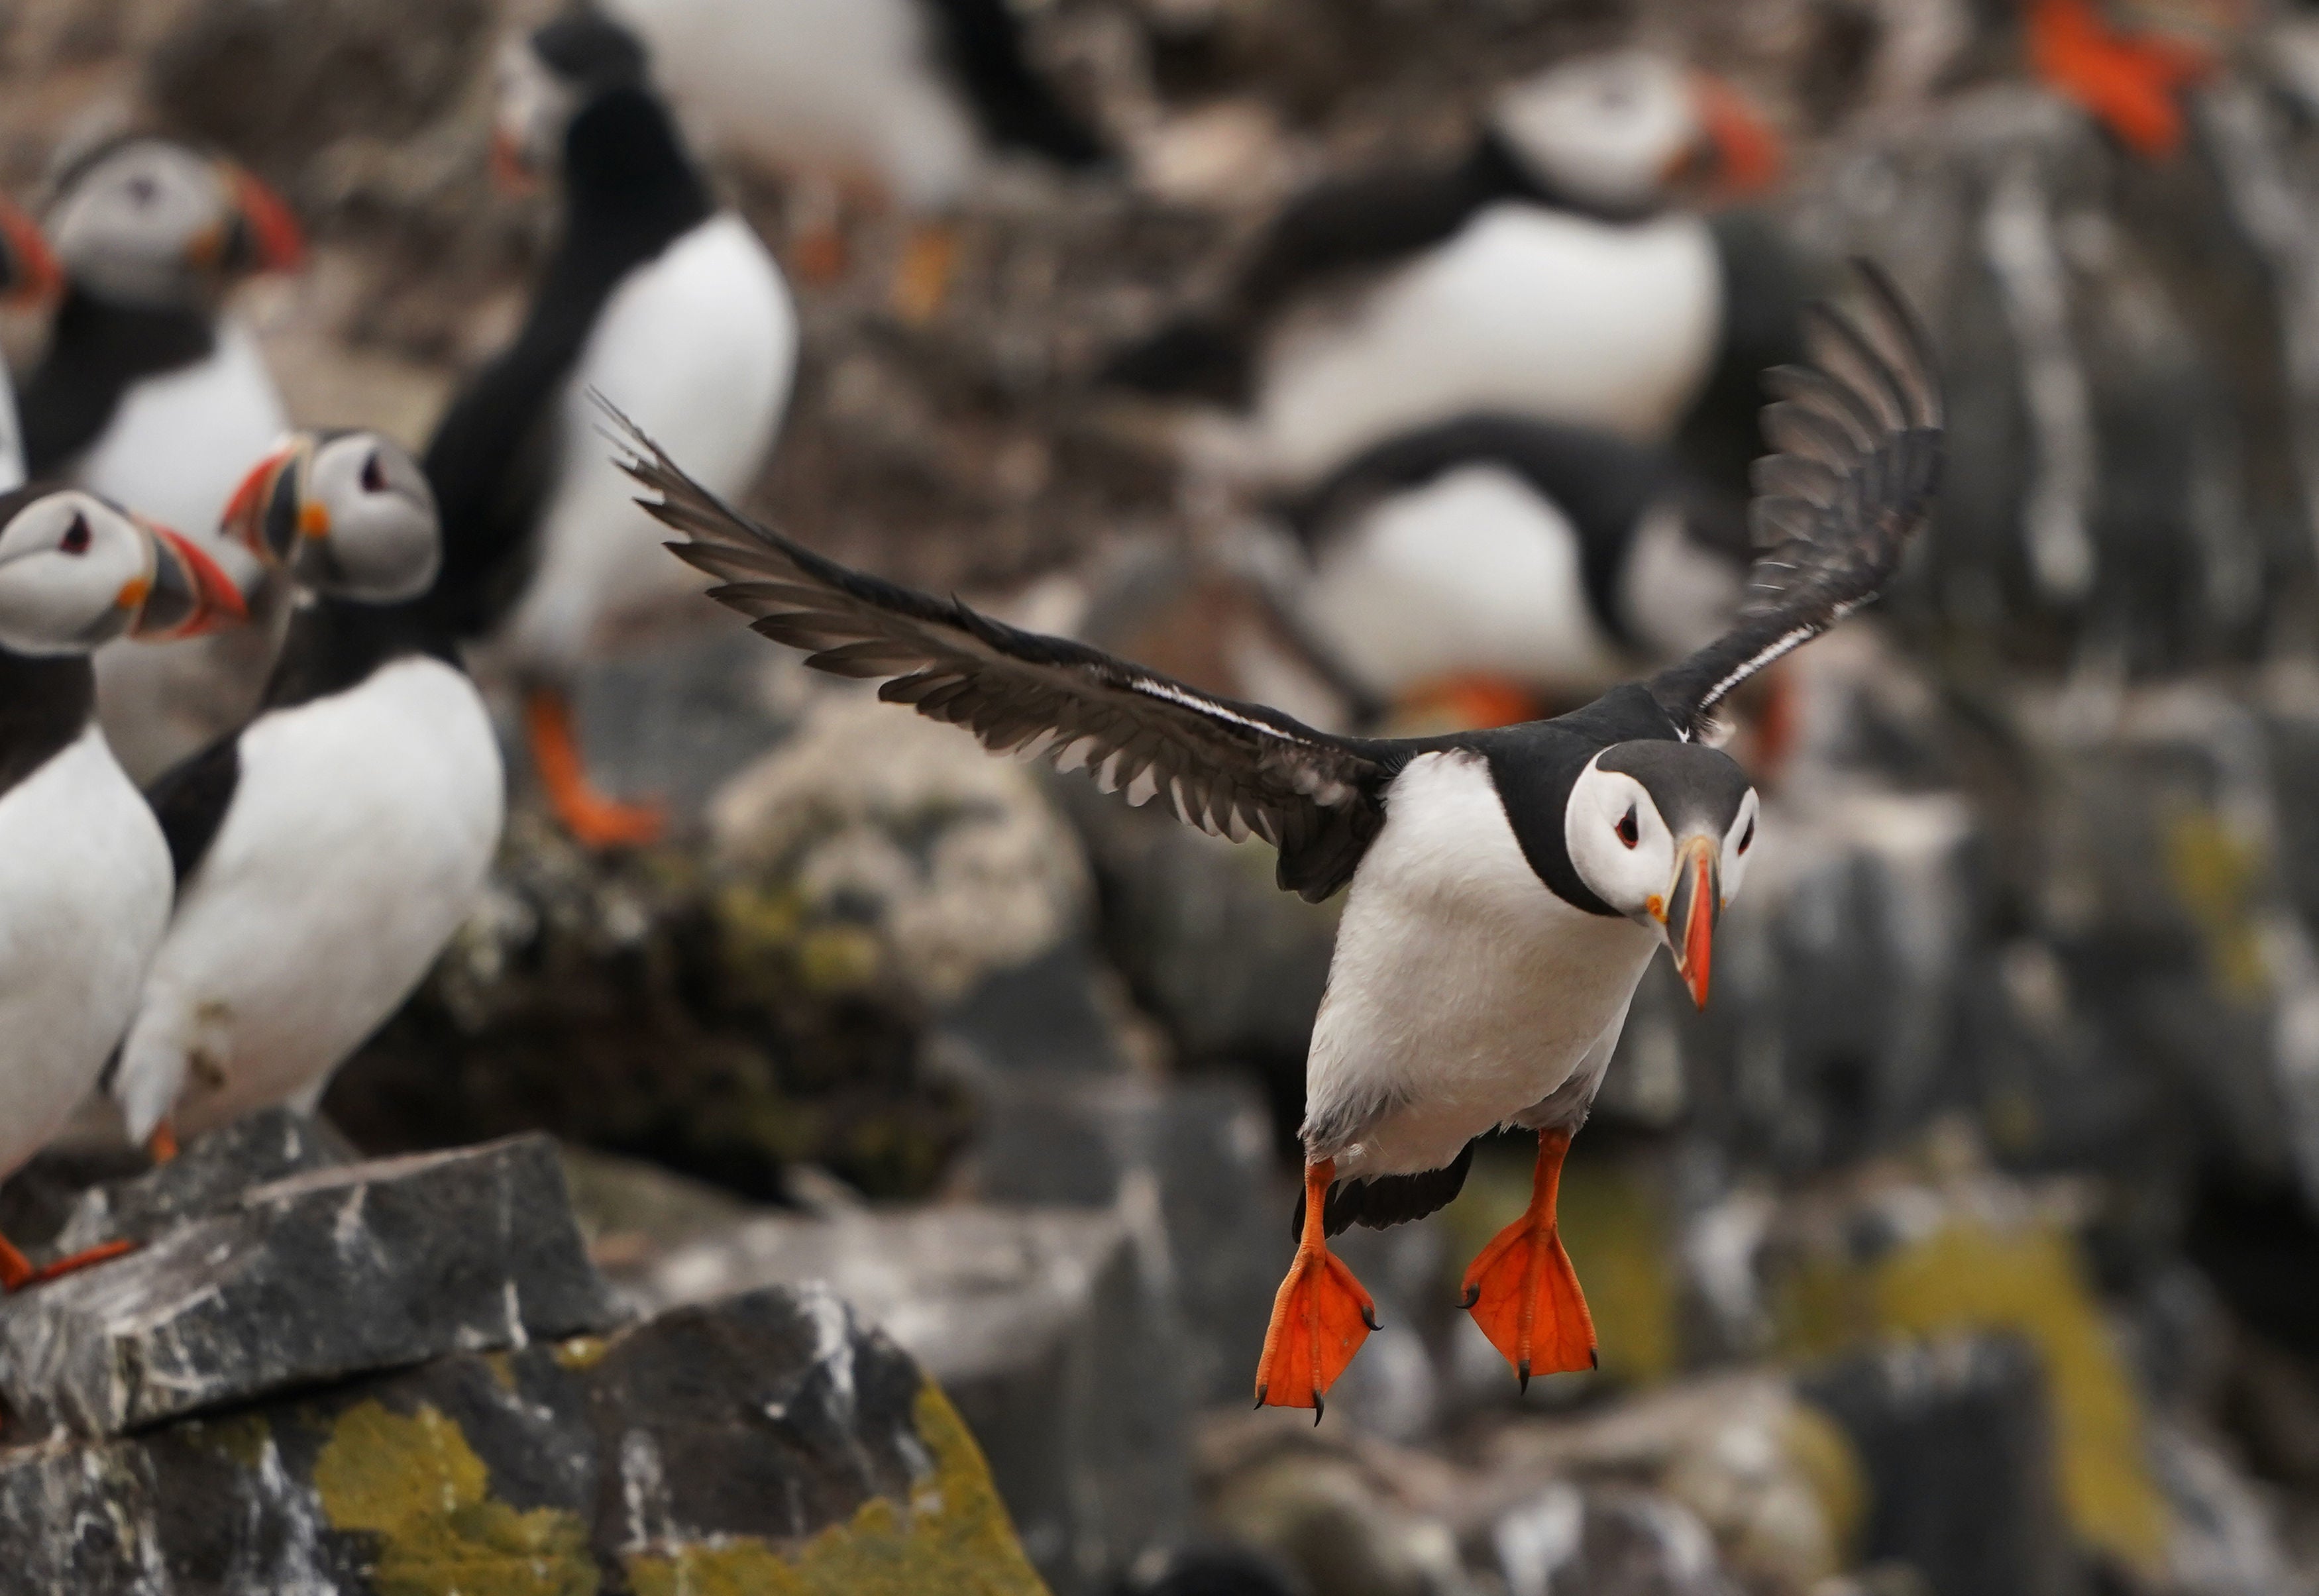 A puffin flies on the Farne Islands in Northumberland as the National Trust staff undertake the now annual puffin census on the remote island